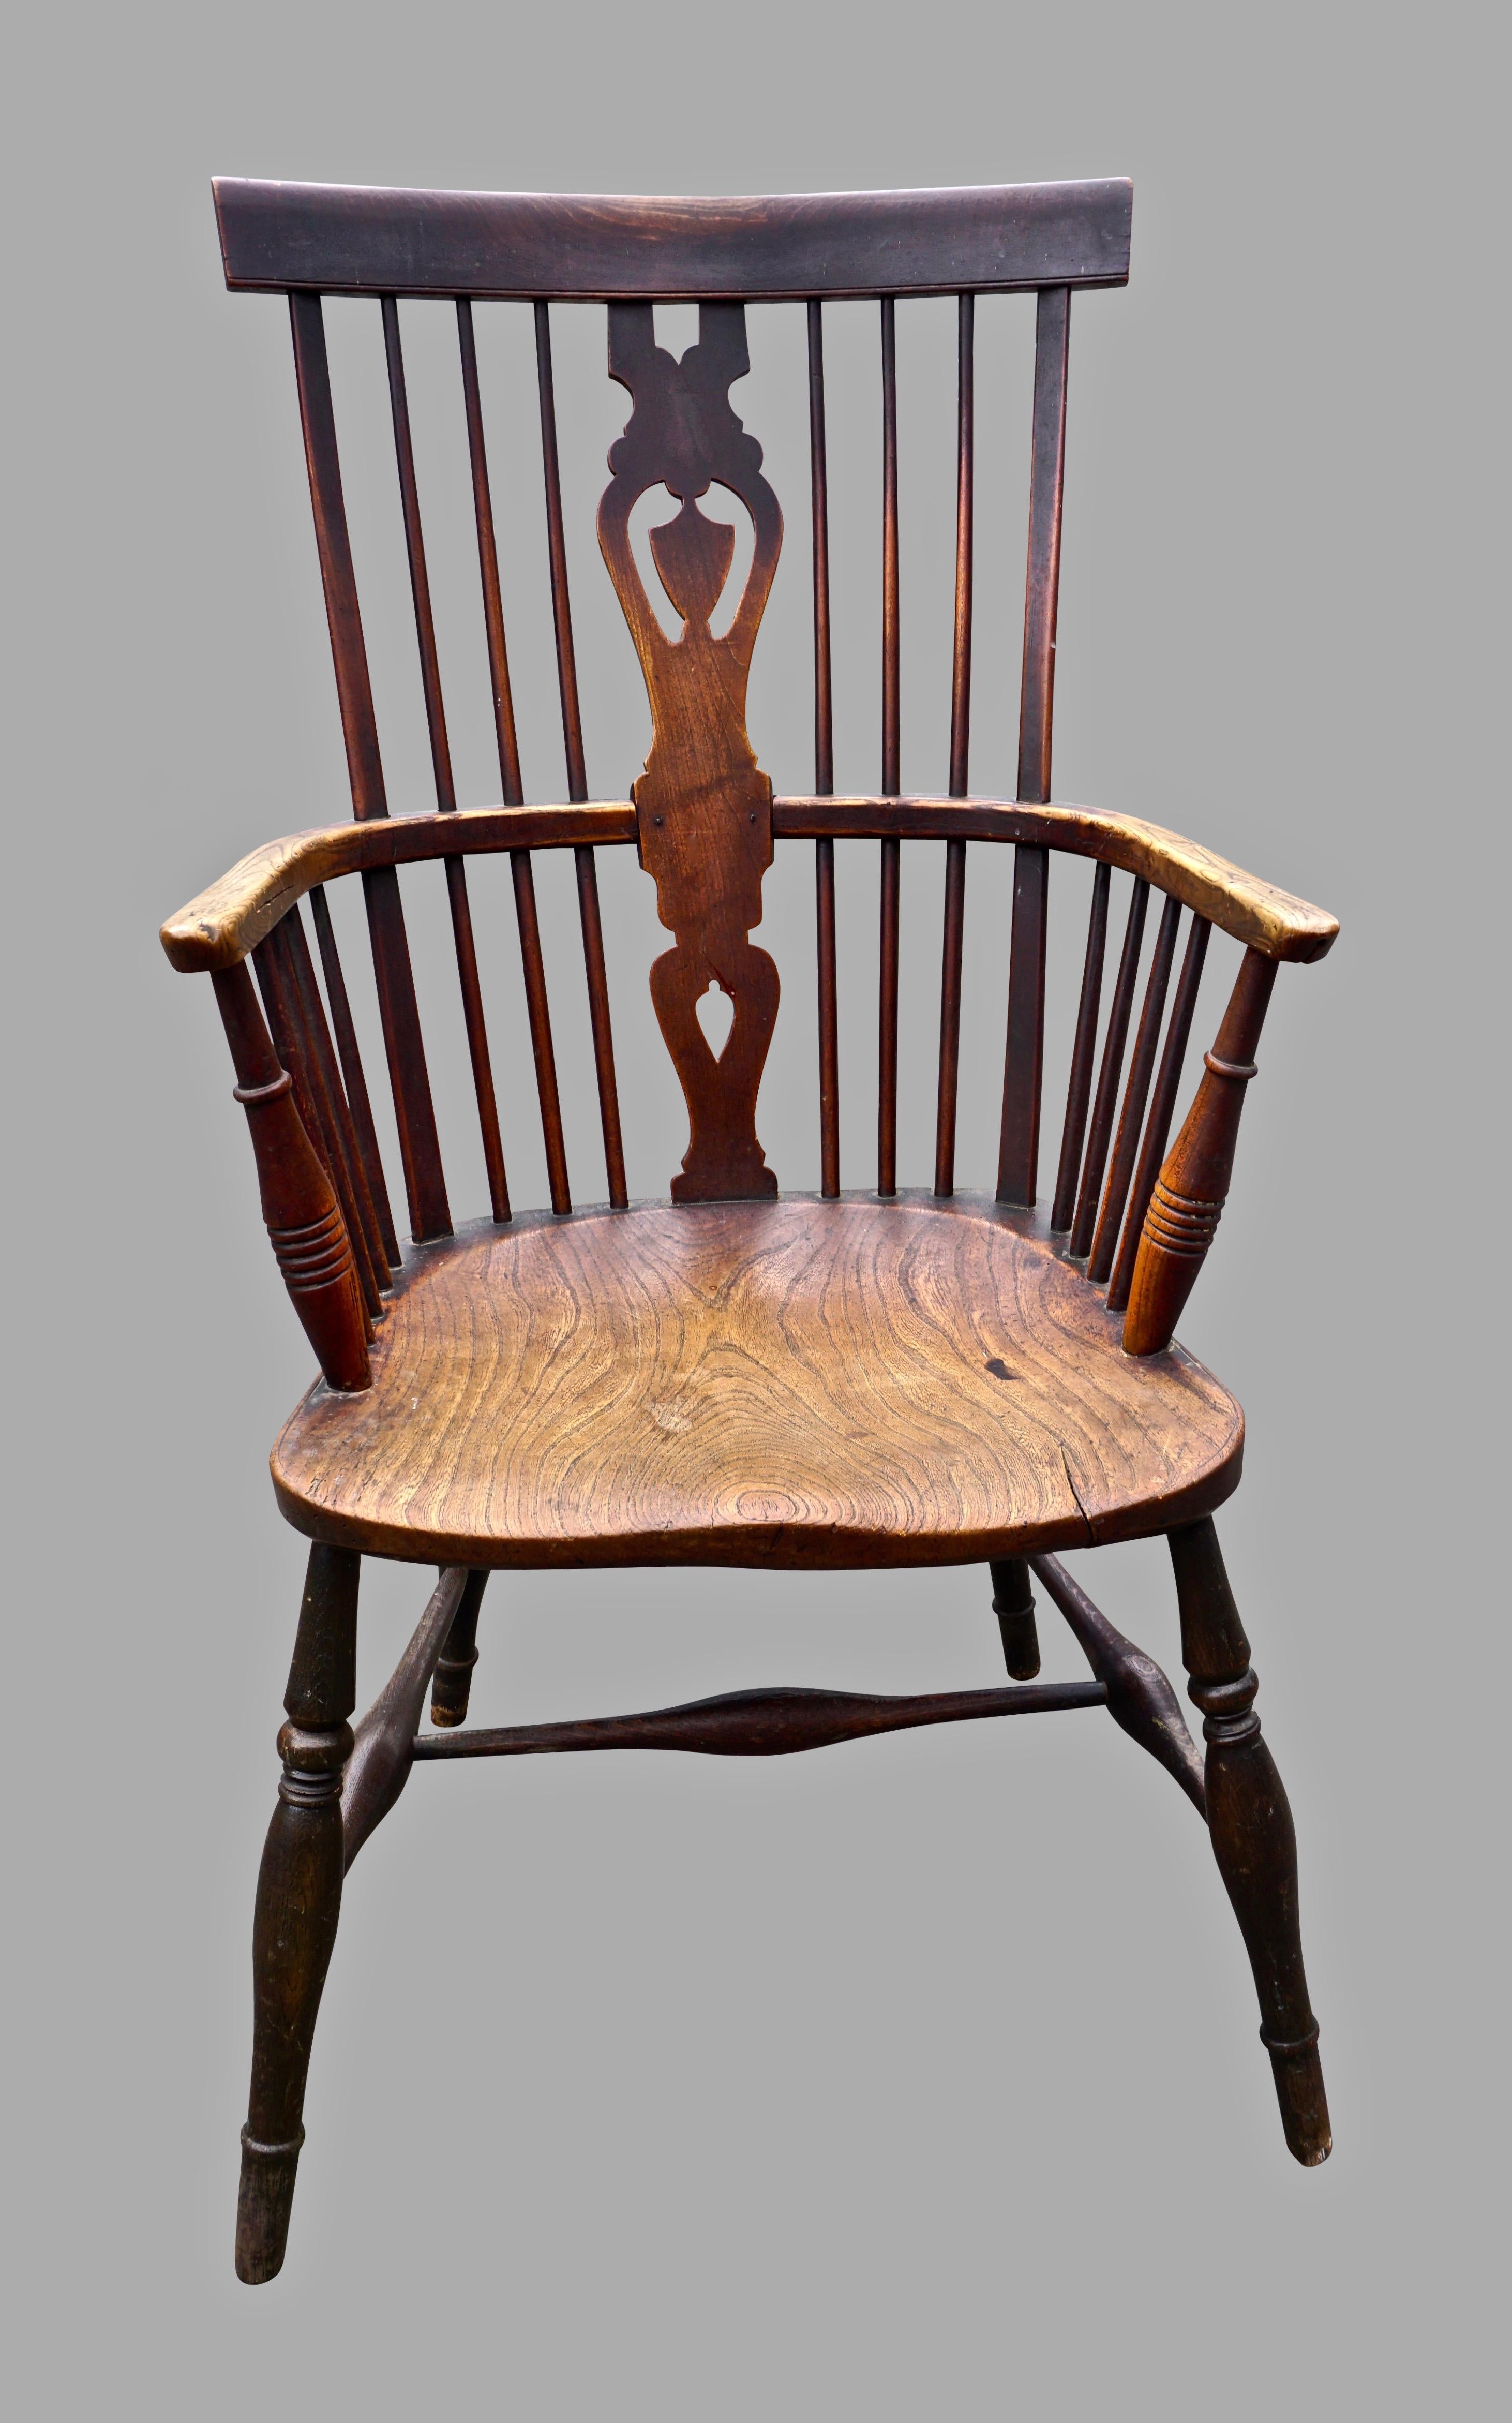 Mid-19th Century English Thames Valley Nineteenth Century Windsor Armchair with Hickory Seat